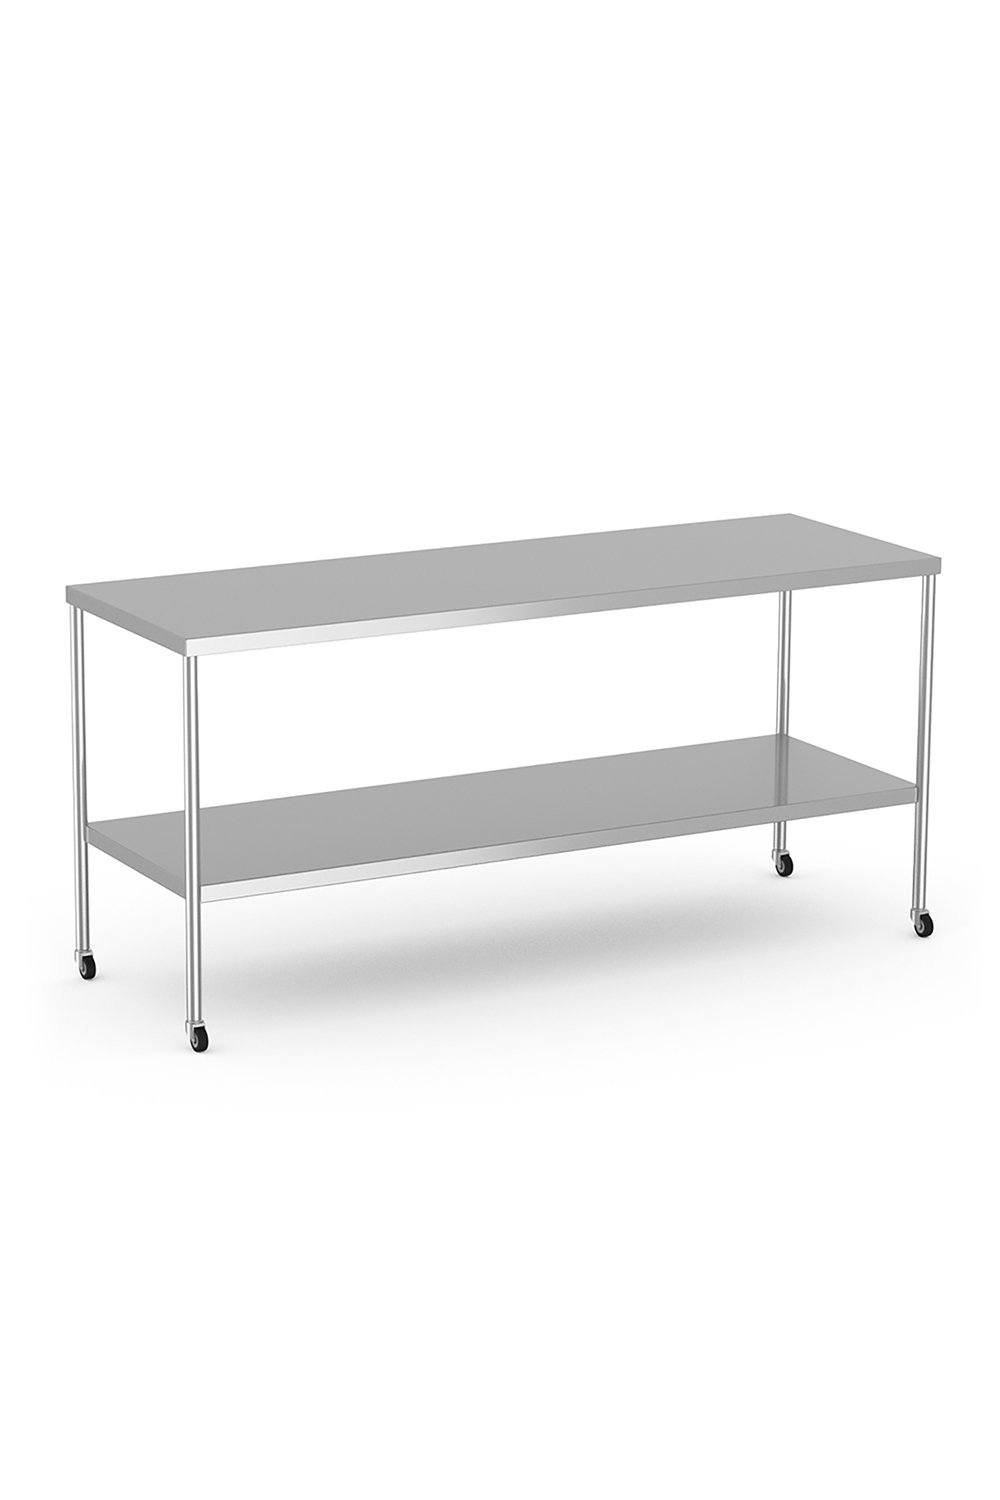 Stainless Steel Table Stainless Solutions Macmedical 24"D x 72"W x 34"H Under-shelf 